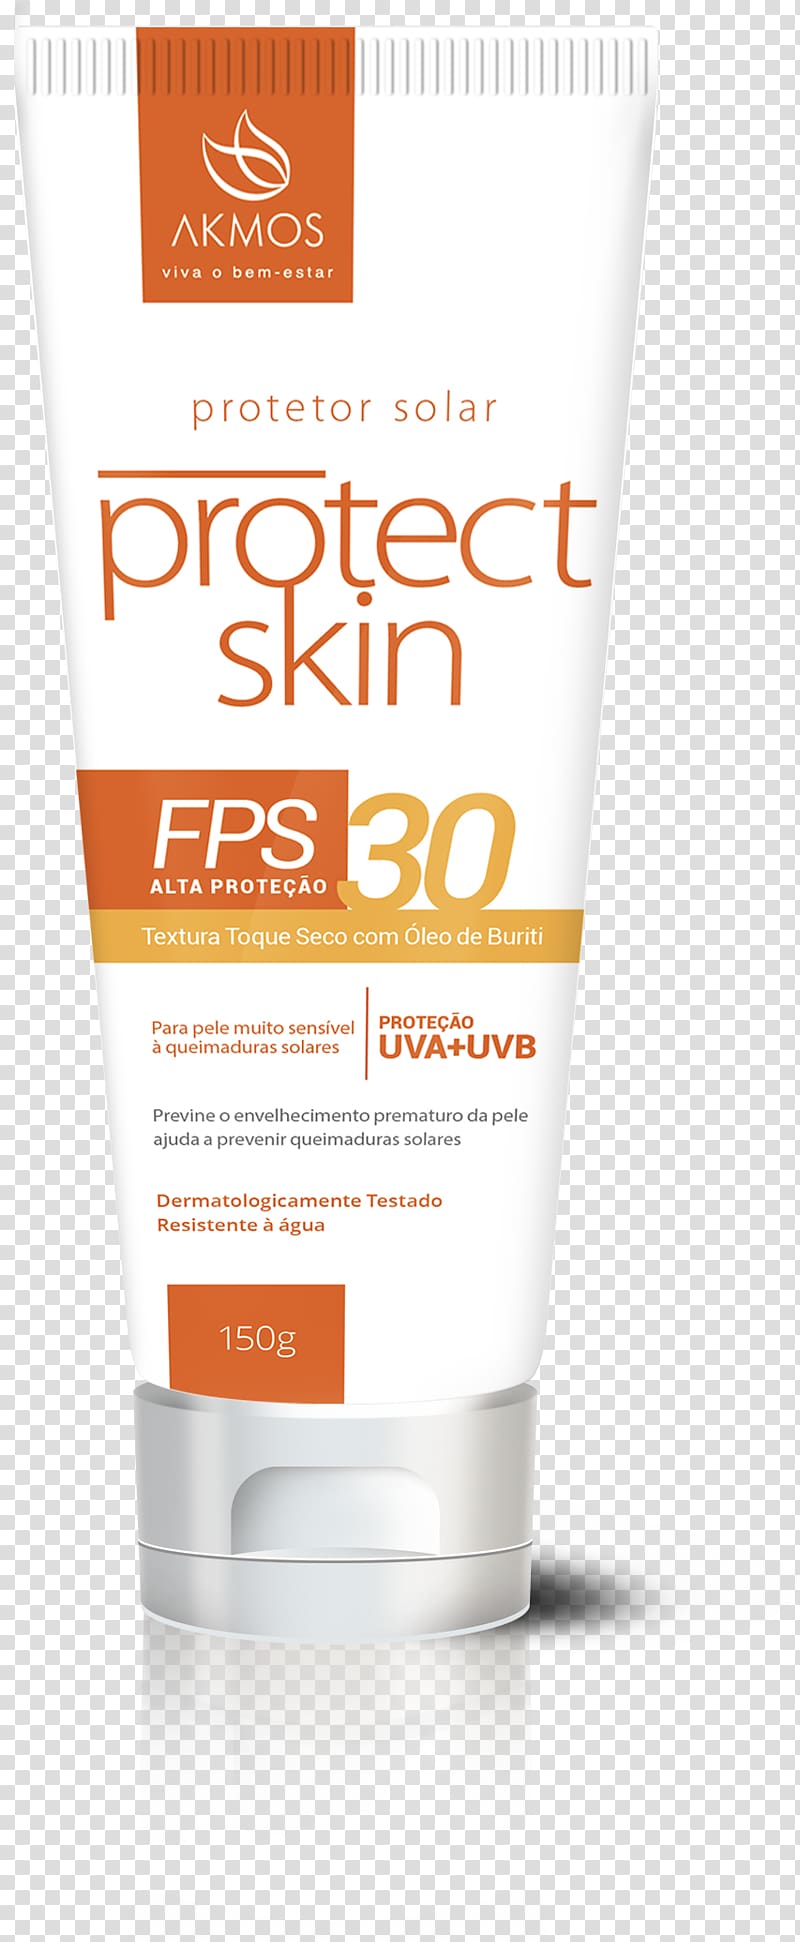 Sunscreen Cream Lotion Skin Product, protect skin transparent background PNG clipart